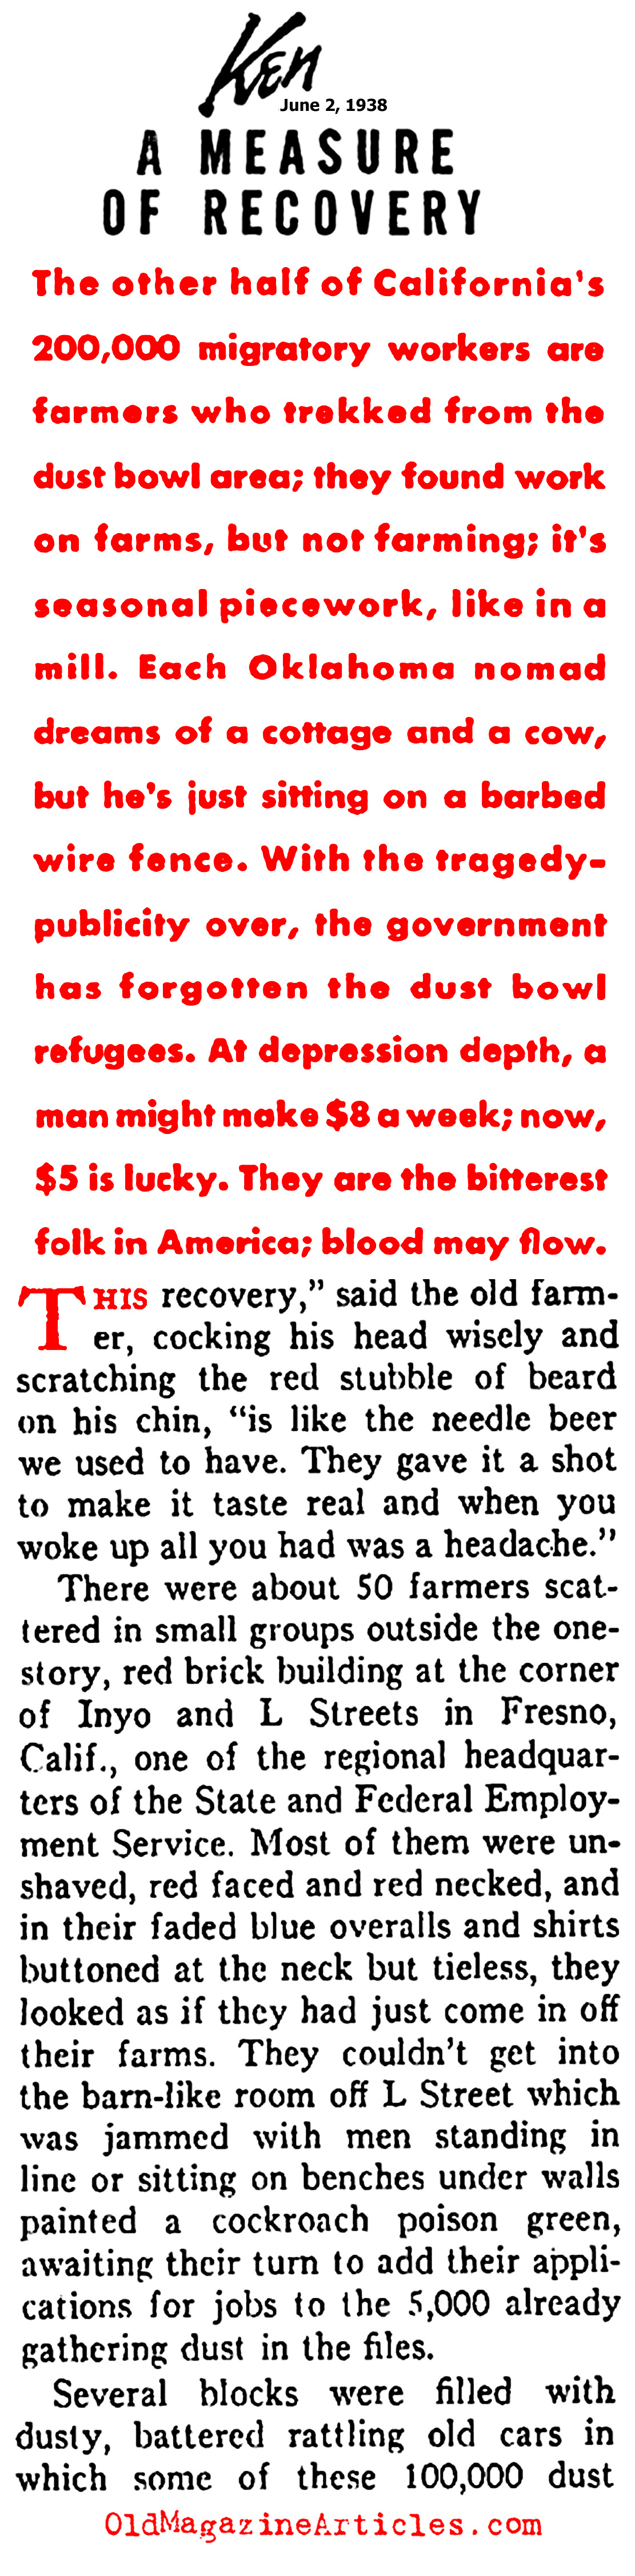 The Okies and the Dust Bowl (Ken Magazine, 1938)